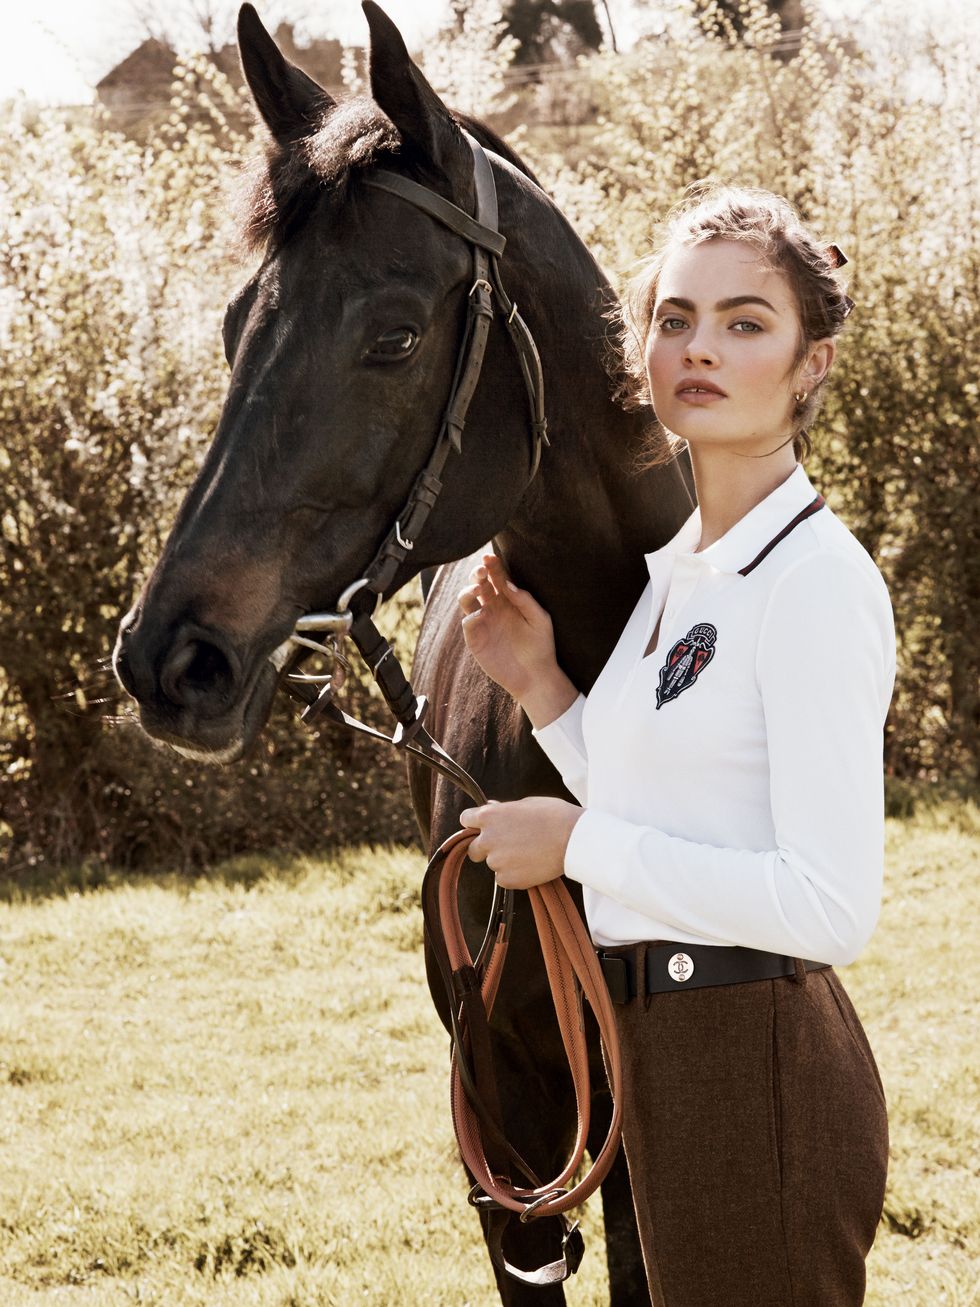 Horse-riding picture from July 2014 issue of Harper's Bazaar